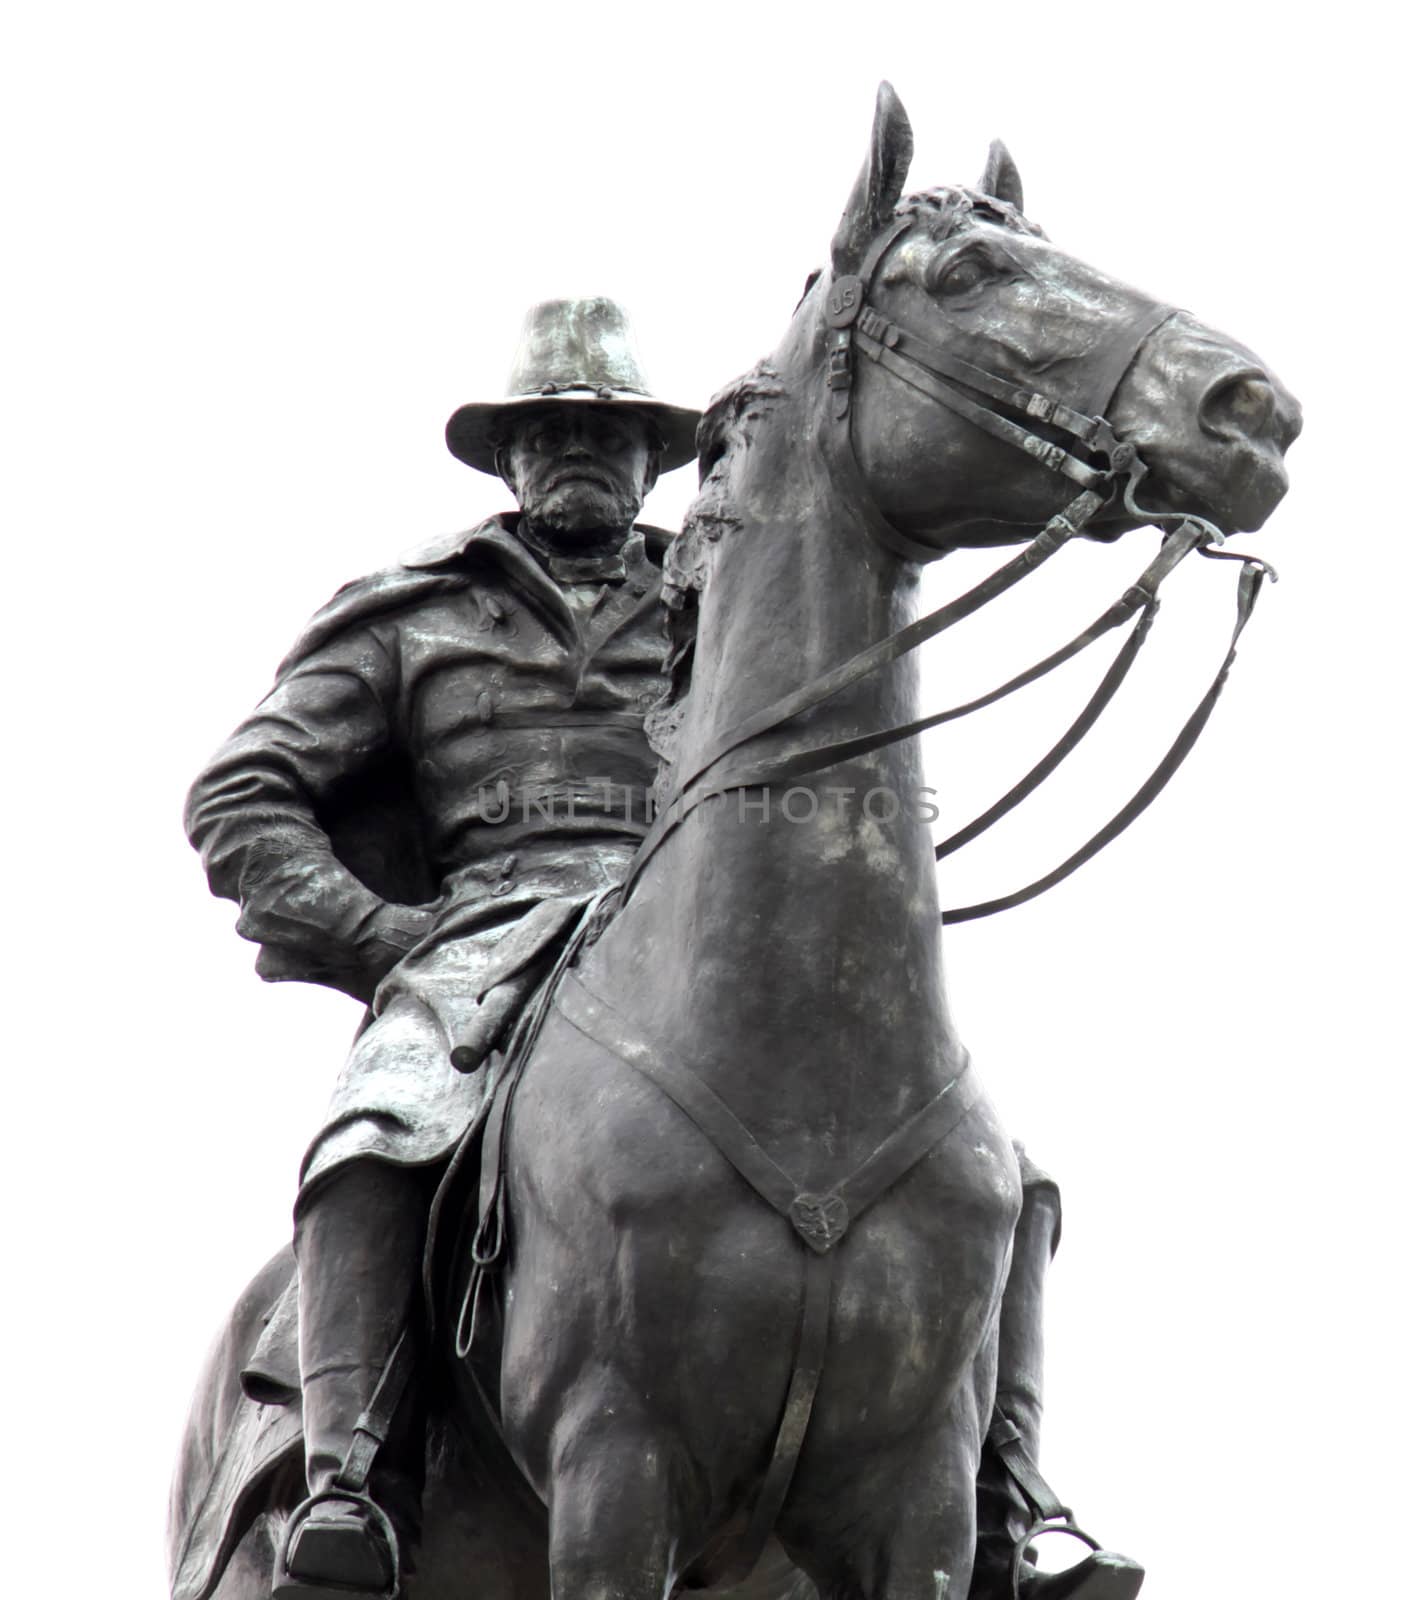 The Ulysses S. Grant Memorial by ca2hill